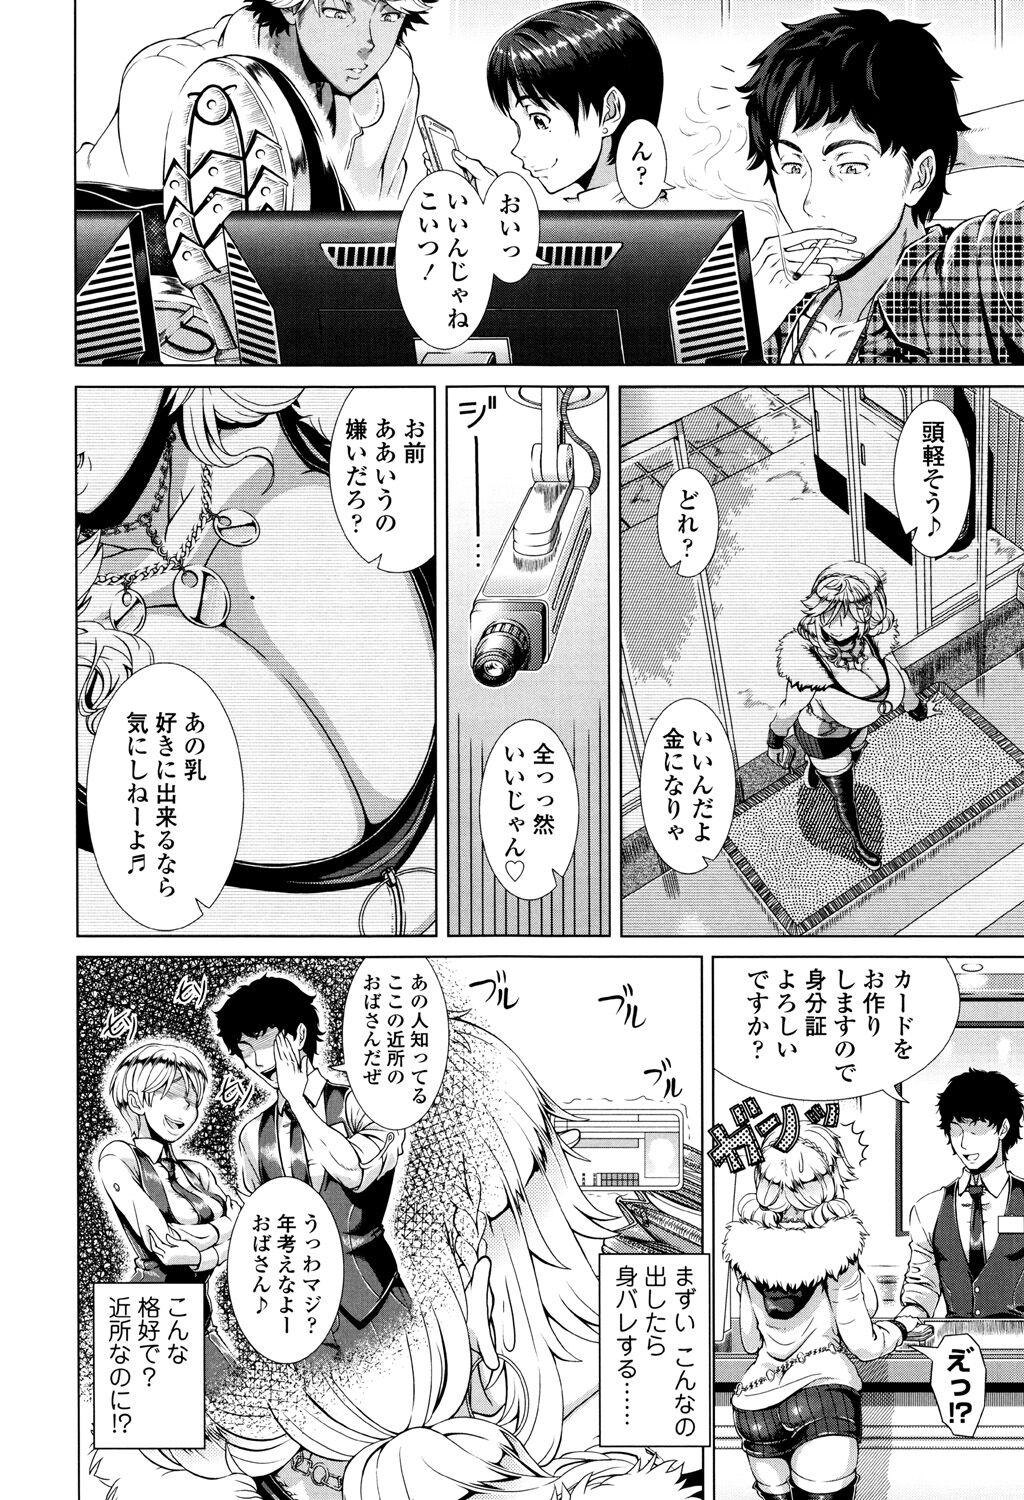 Stepfamily Hitozuma Life - Married Woman Life Oldyoung - Page 6